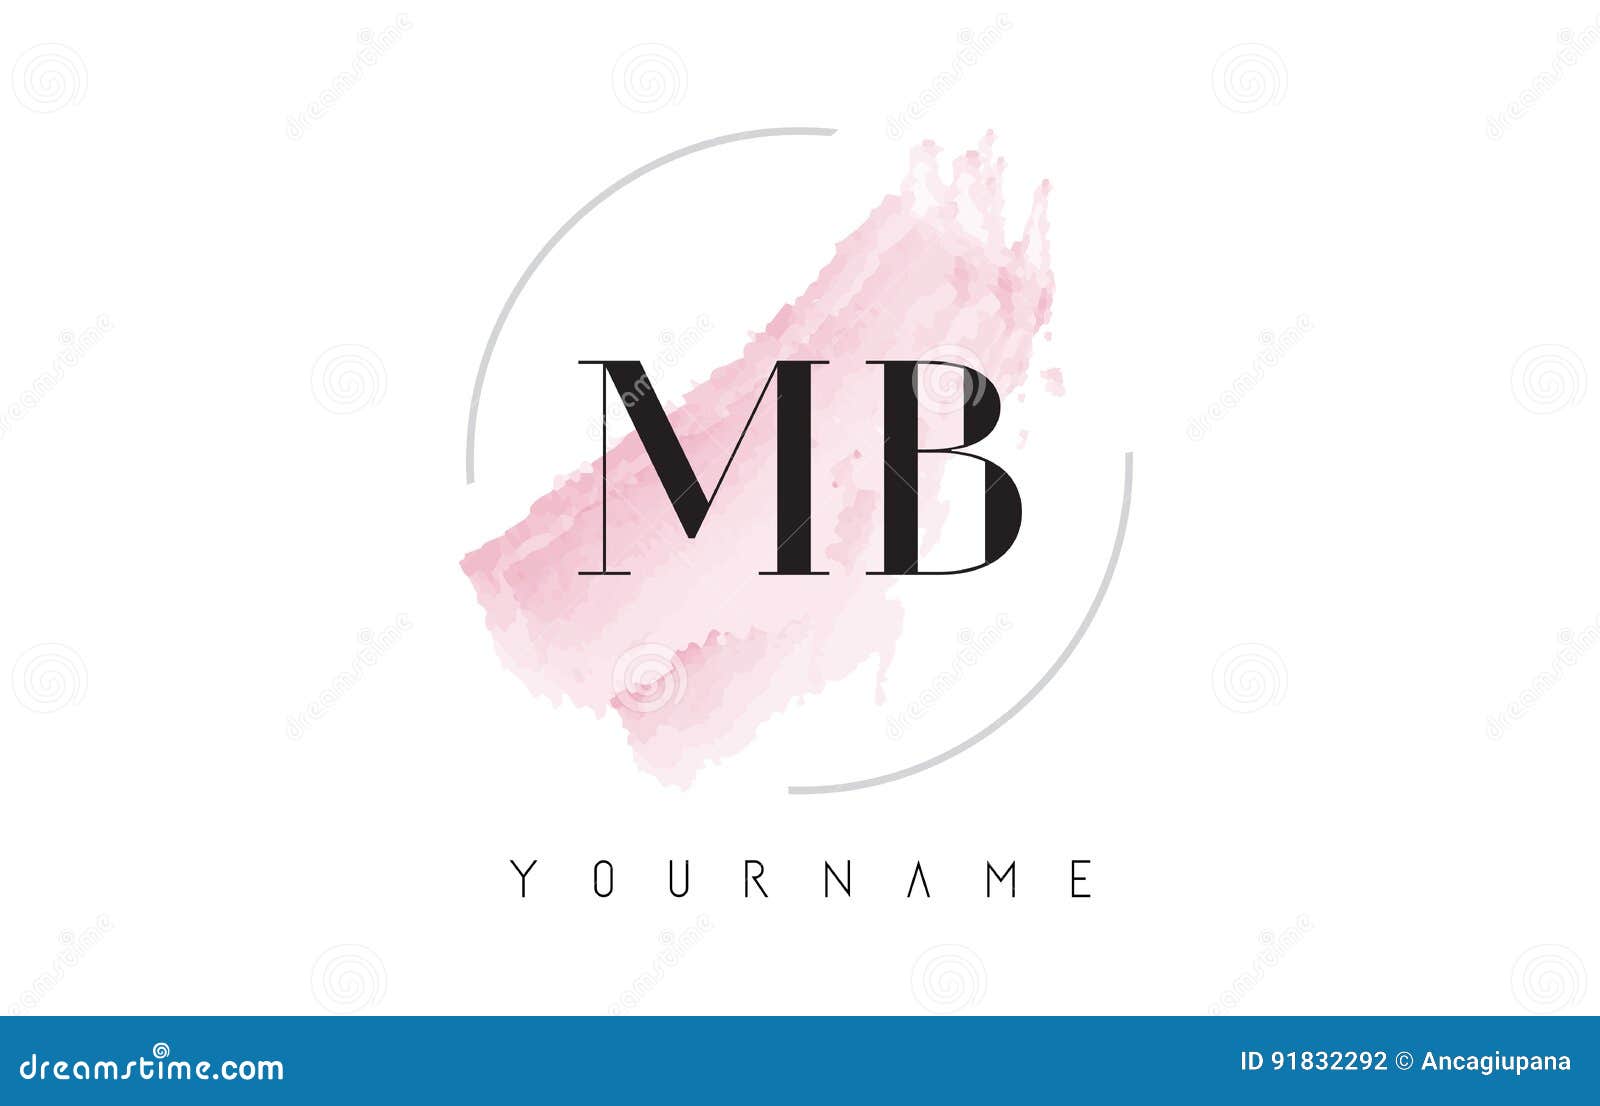 Letter B Logo Initial Vector & Photo (Free Trial)